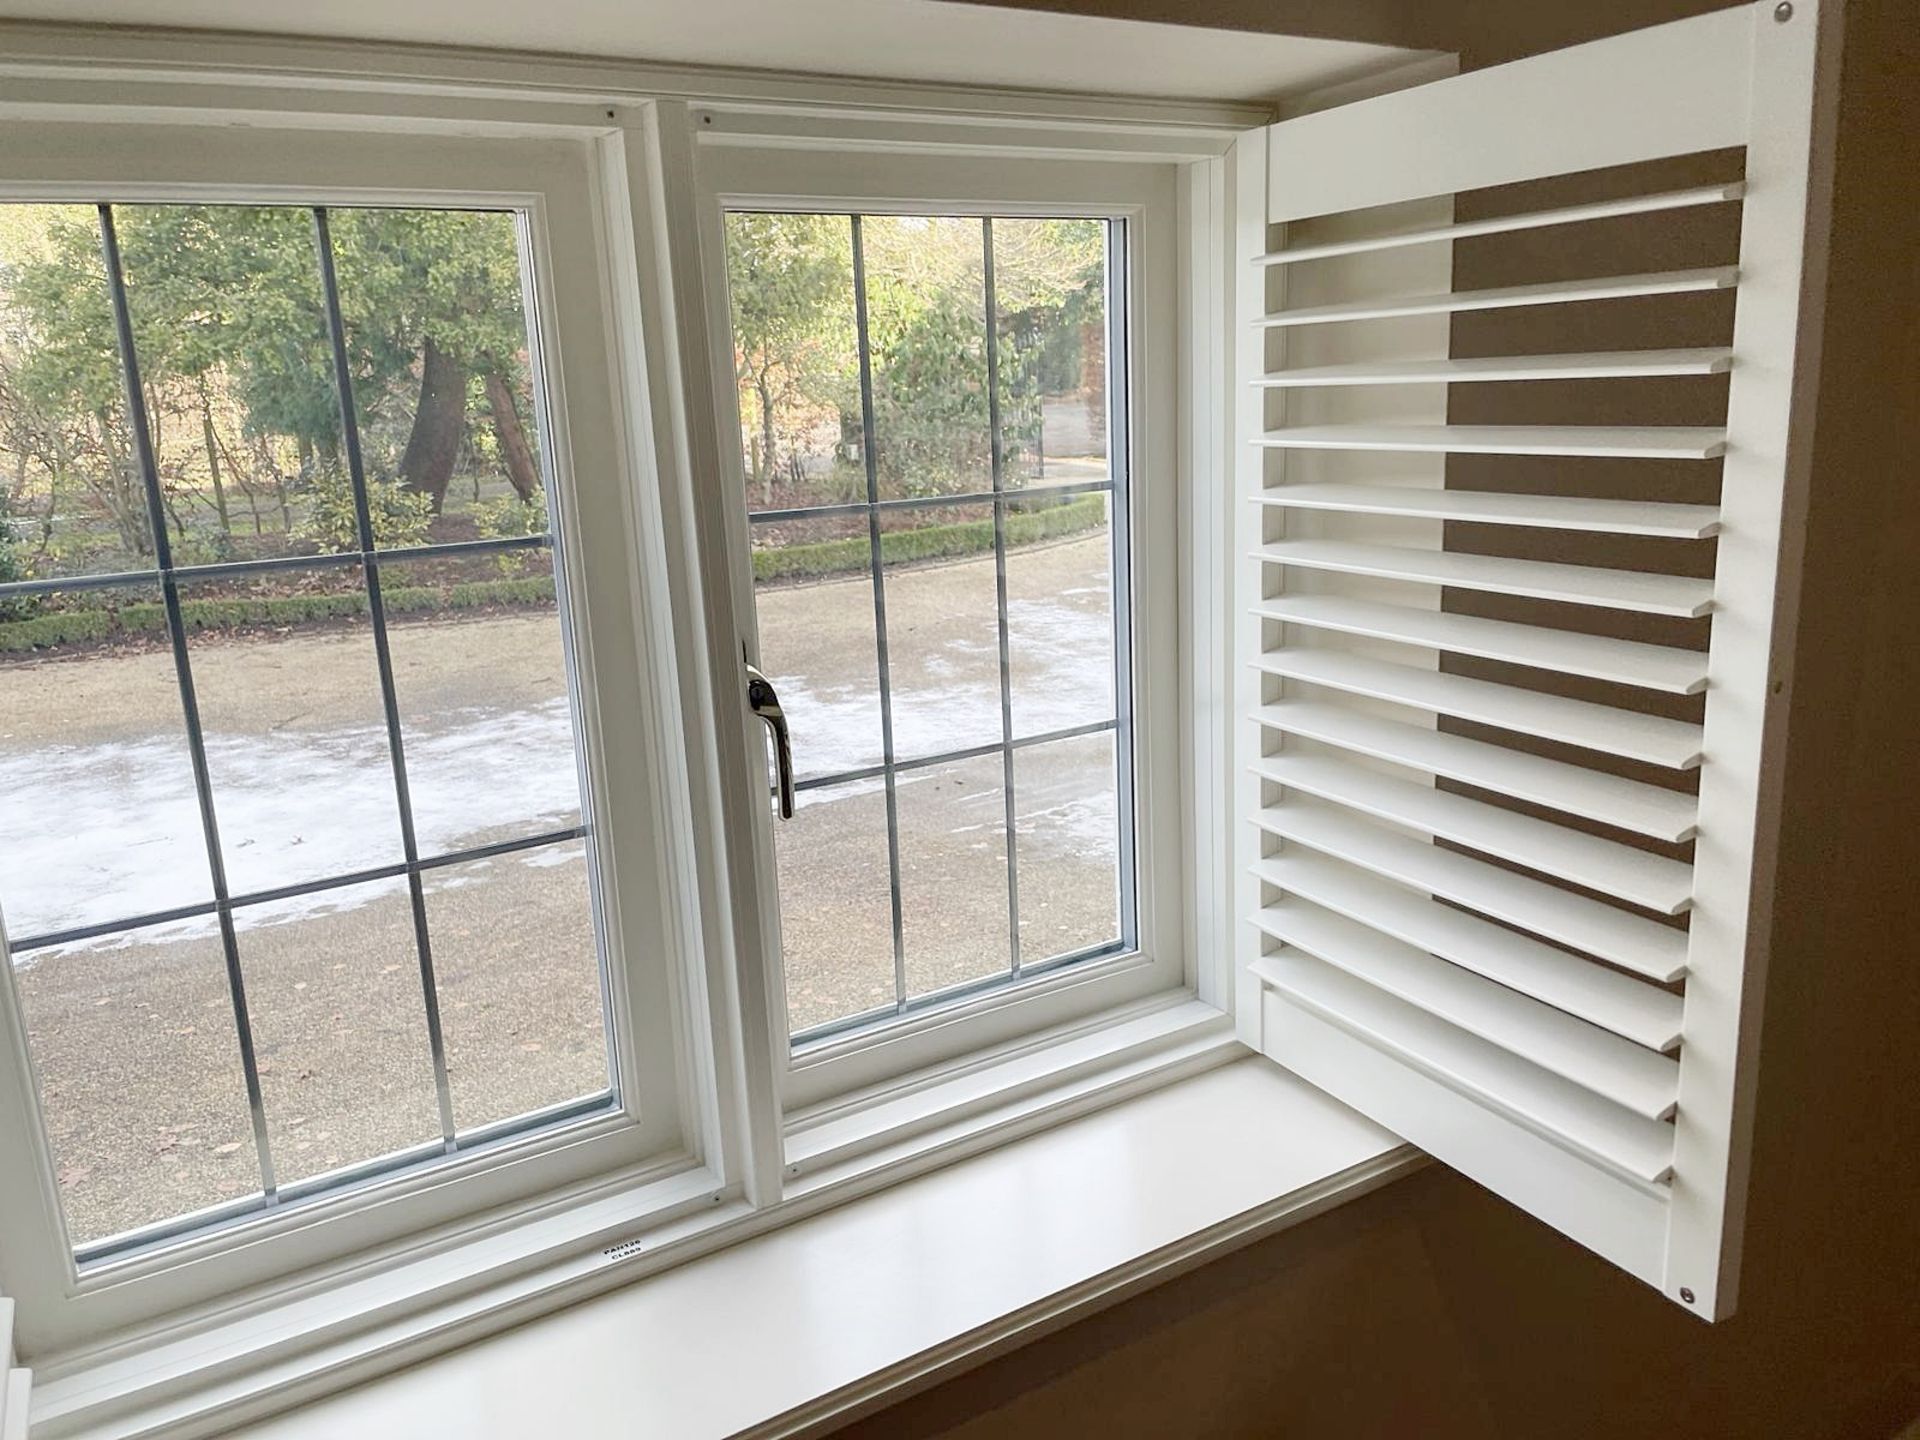 1 x Hardwood Timber Double Glazed Leaded 3-Pane Window Frame fitted with Shutter Blinds - Image 4 of 15